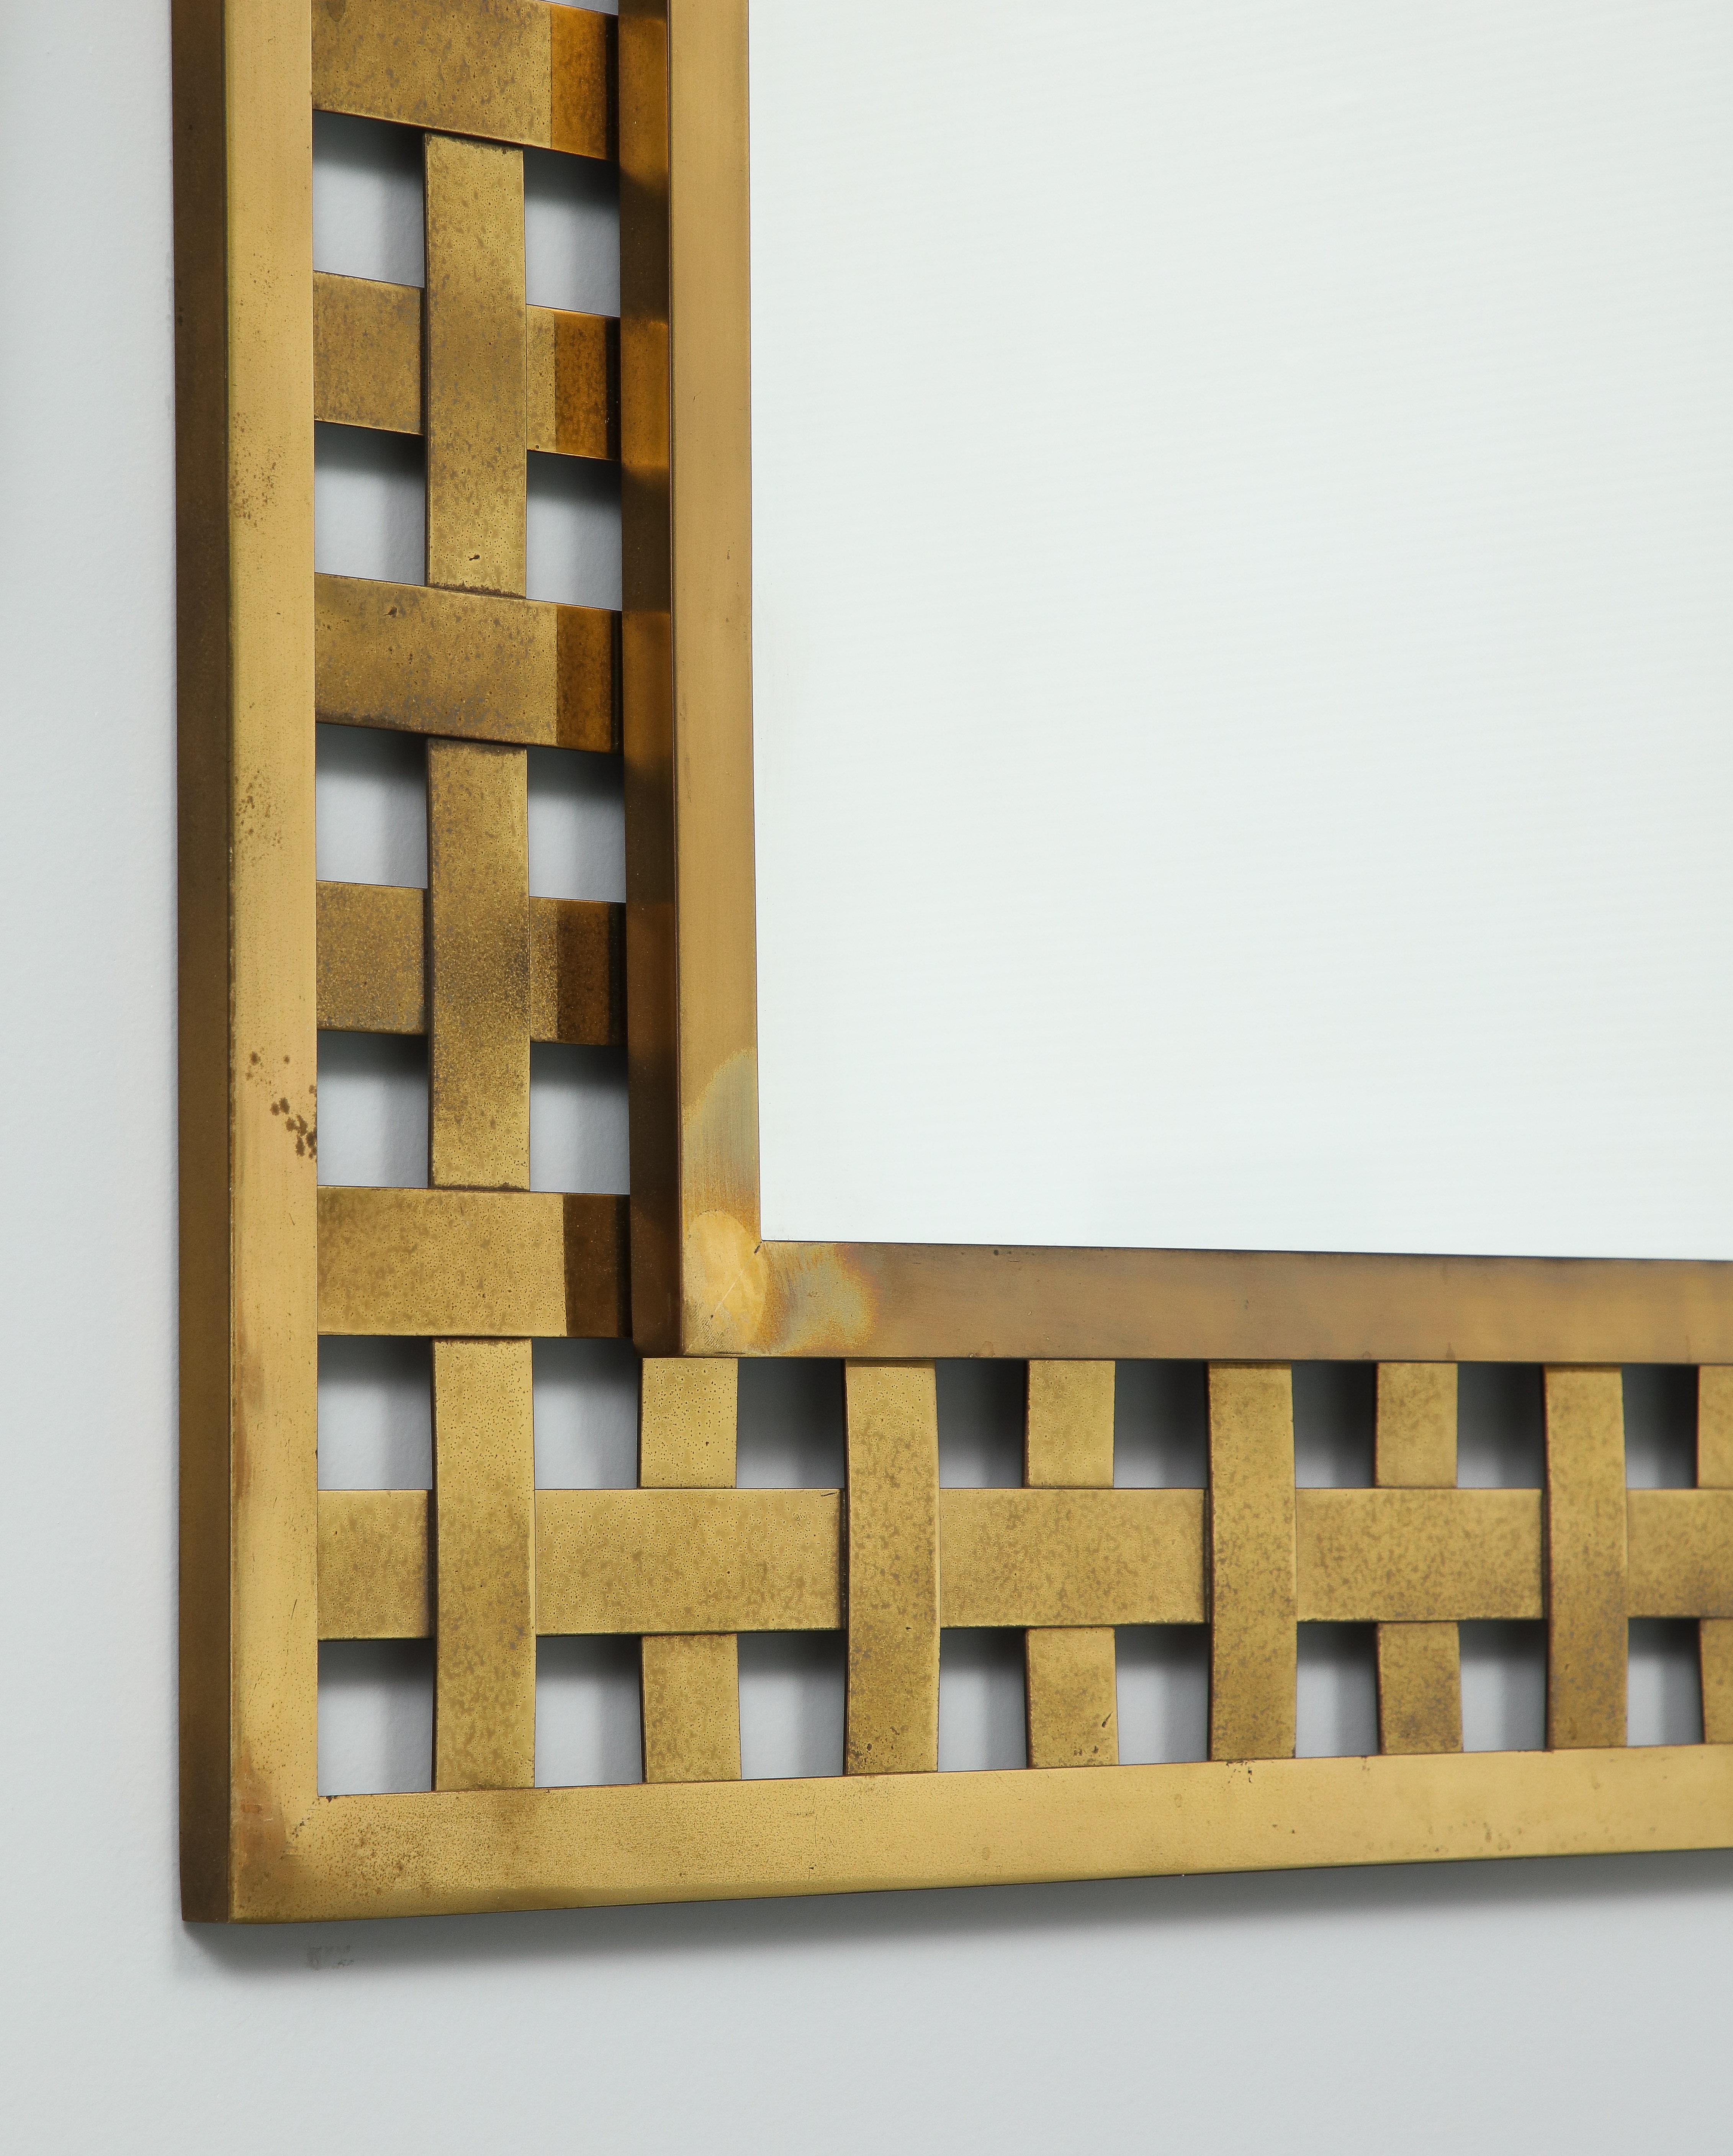 The mirror is rectangular and the brass lattice pattern gives a sophistication to the design. 